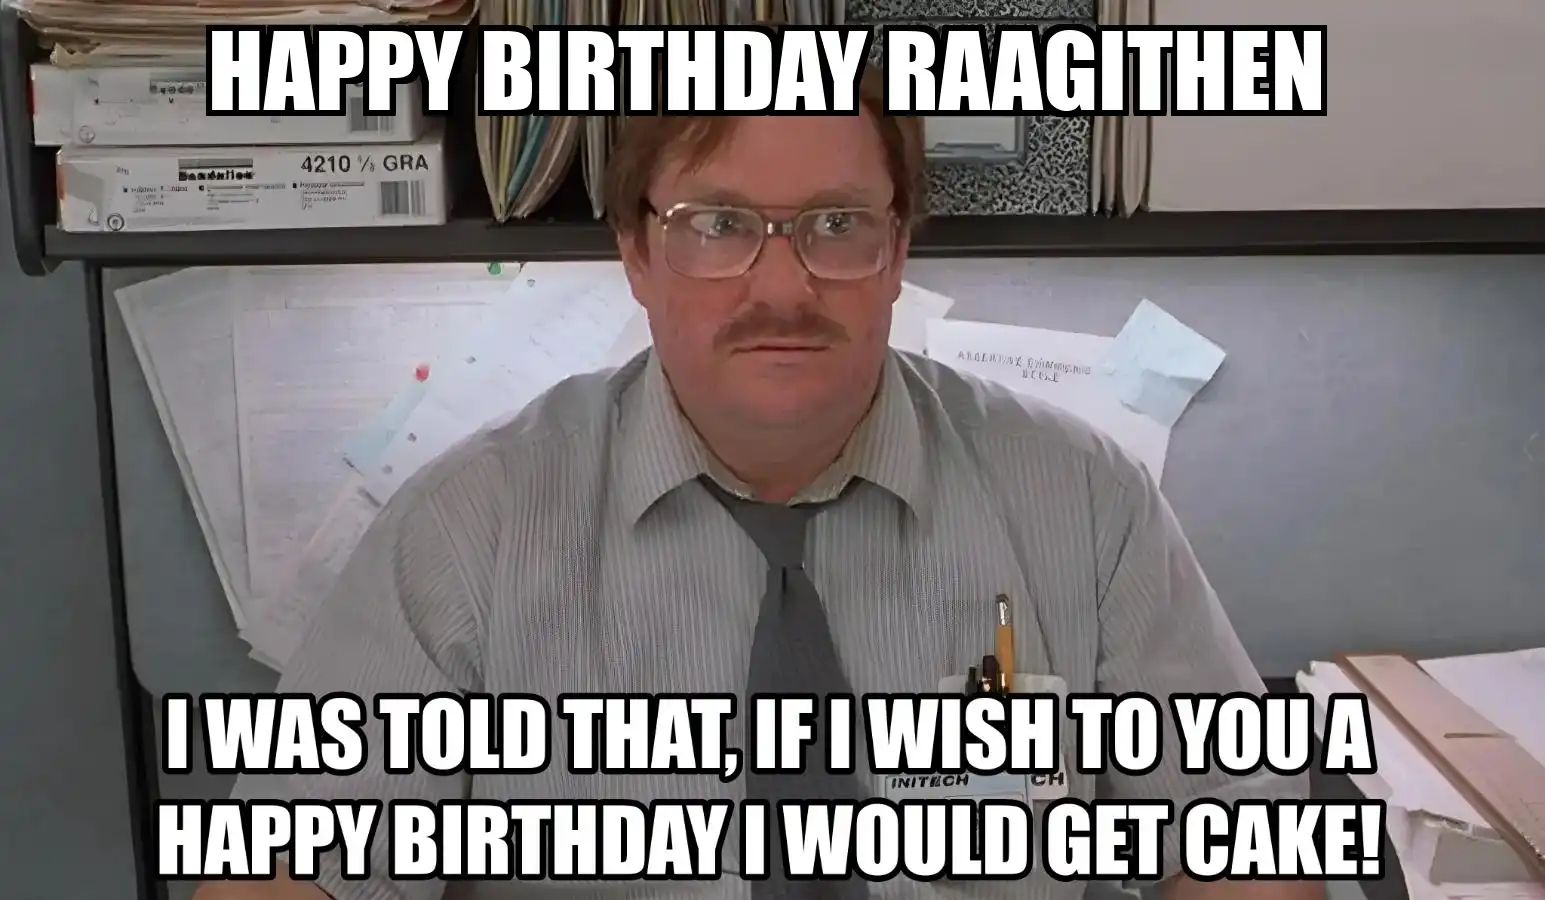 Happy Birthday Raagithen I Would Get A Cake Meme